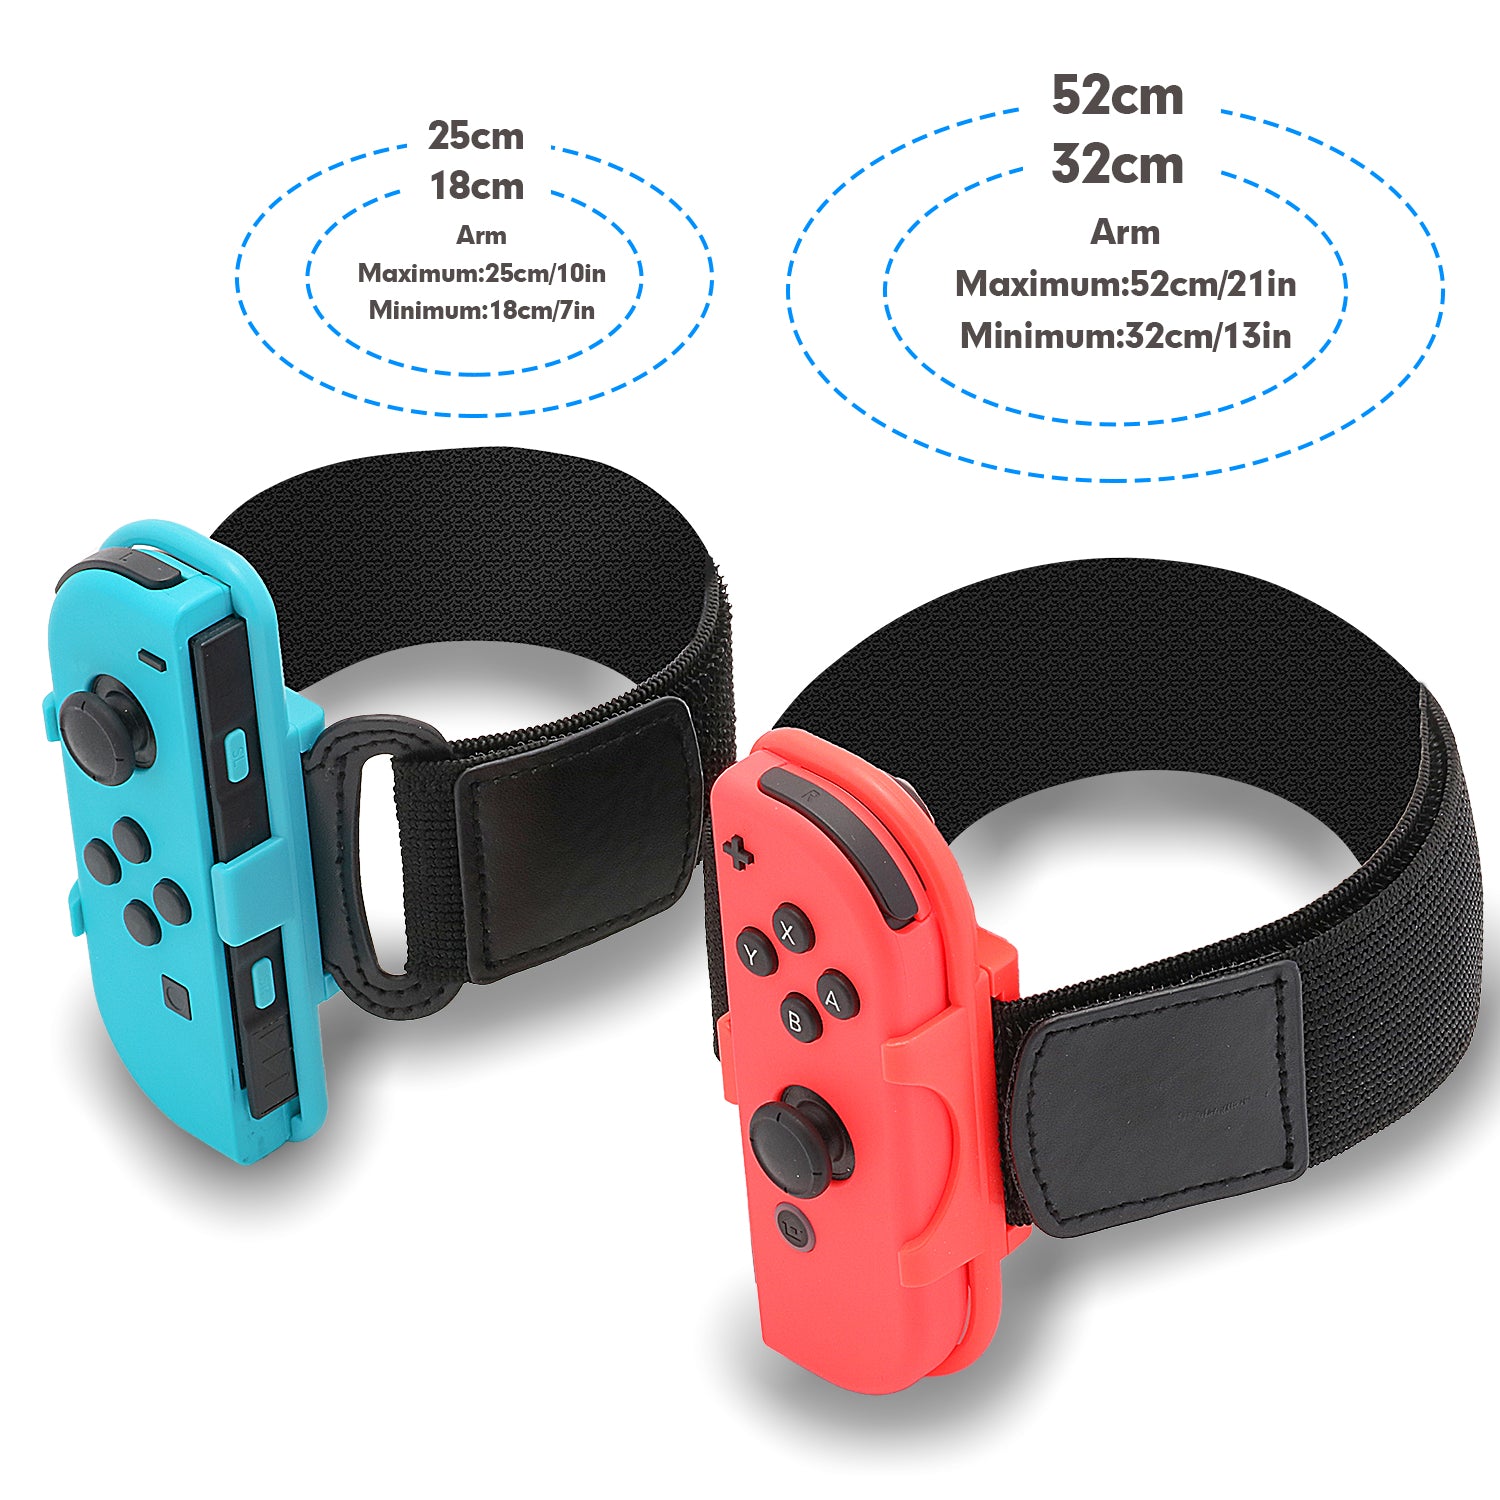 Nintendo Switch Ring Fit Adventure Accessories – ECHZOVE